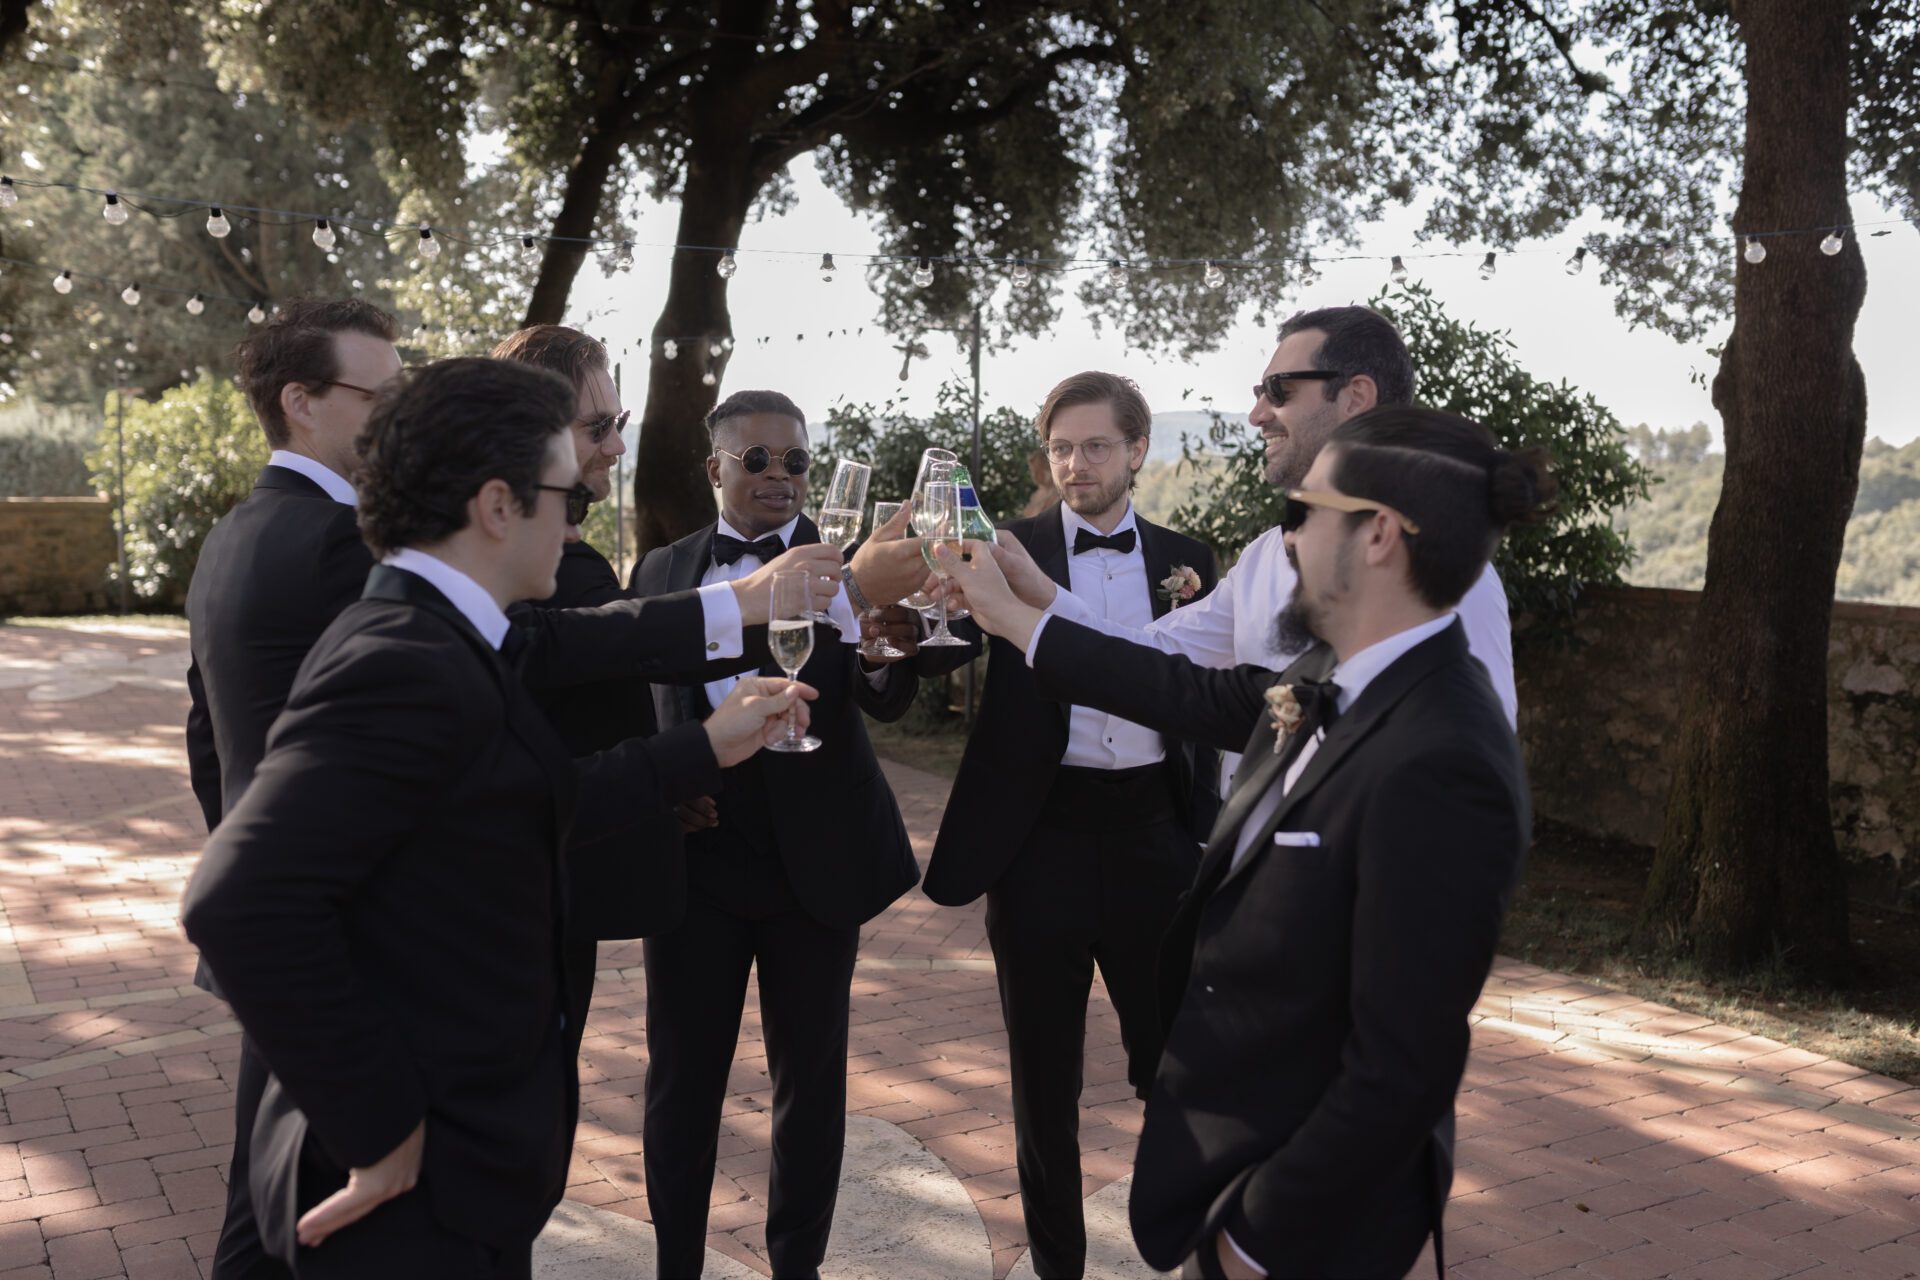 The groom and his groomsmen share a drink at his wedding in Tuscany